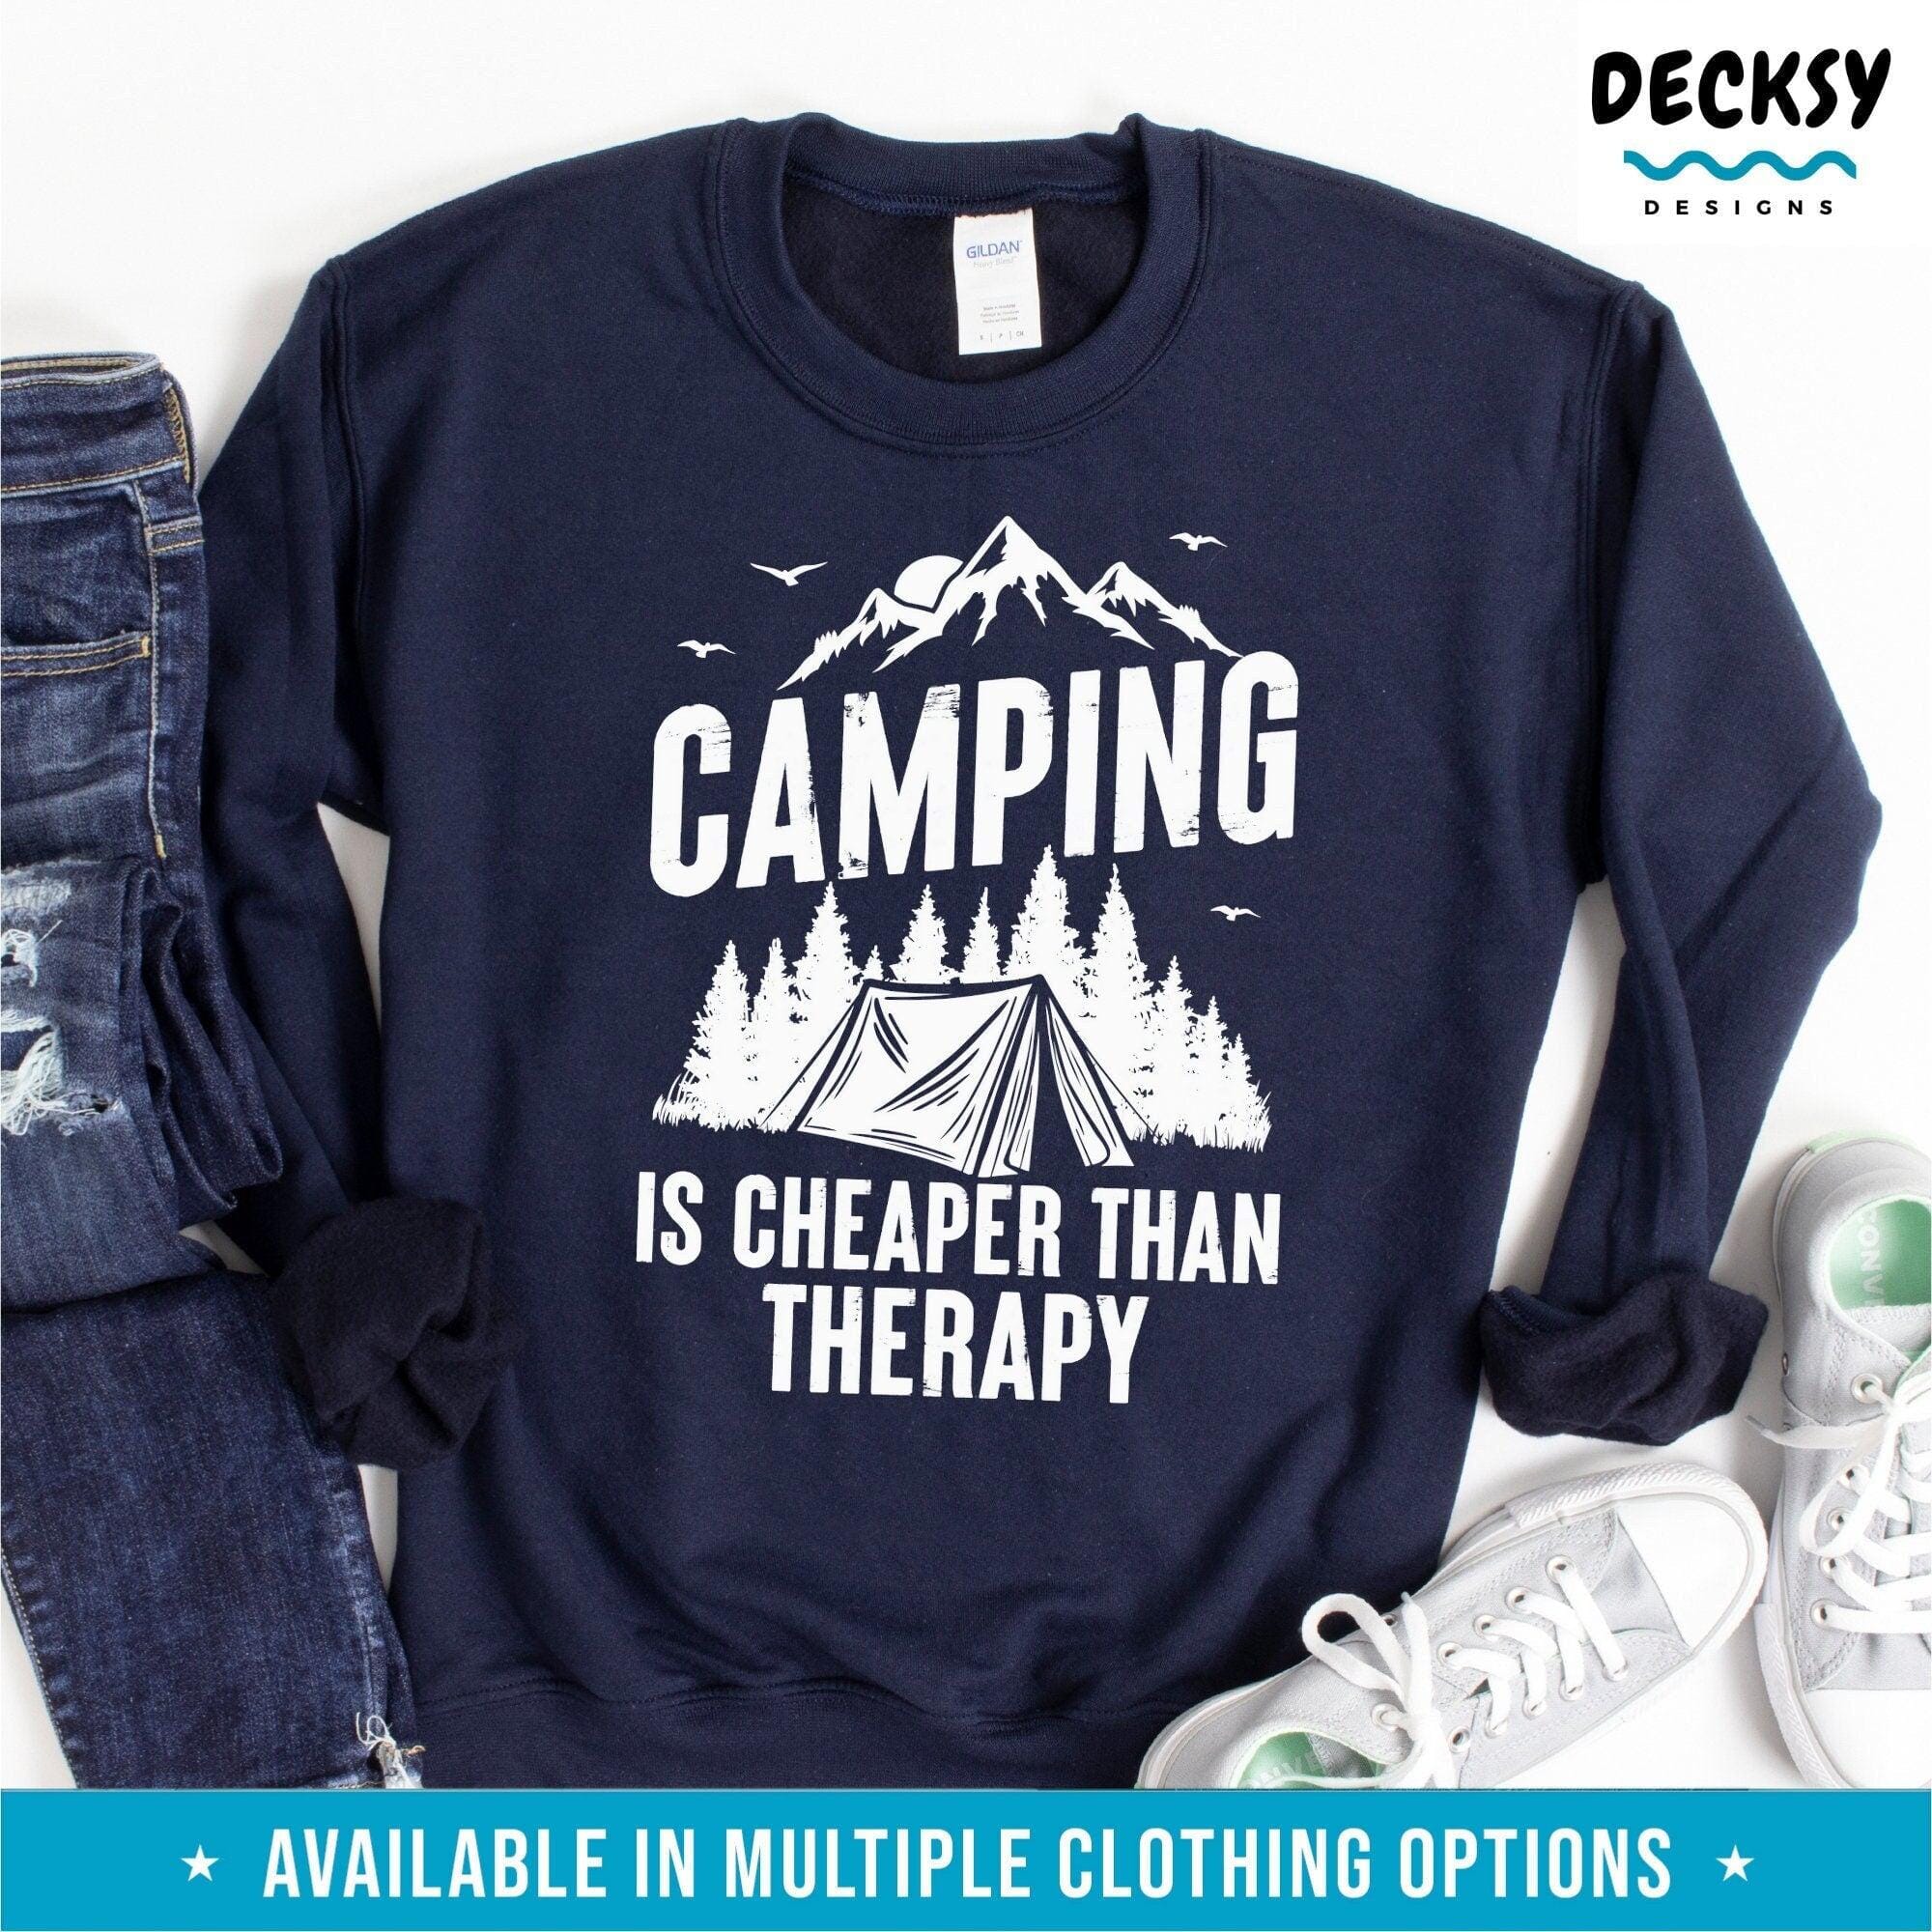 Camping Shirt, Camp Lover Gift-Clothing:Gender-Neutral Adult Clothing:Tops & Tees:T-shirts:Graphic Tees-DecksyDesigns